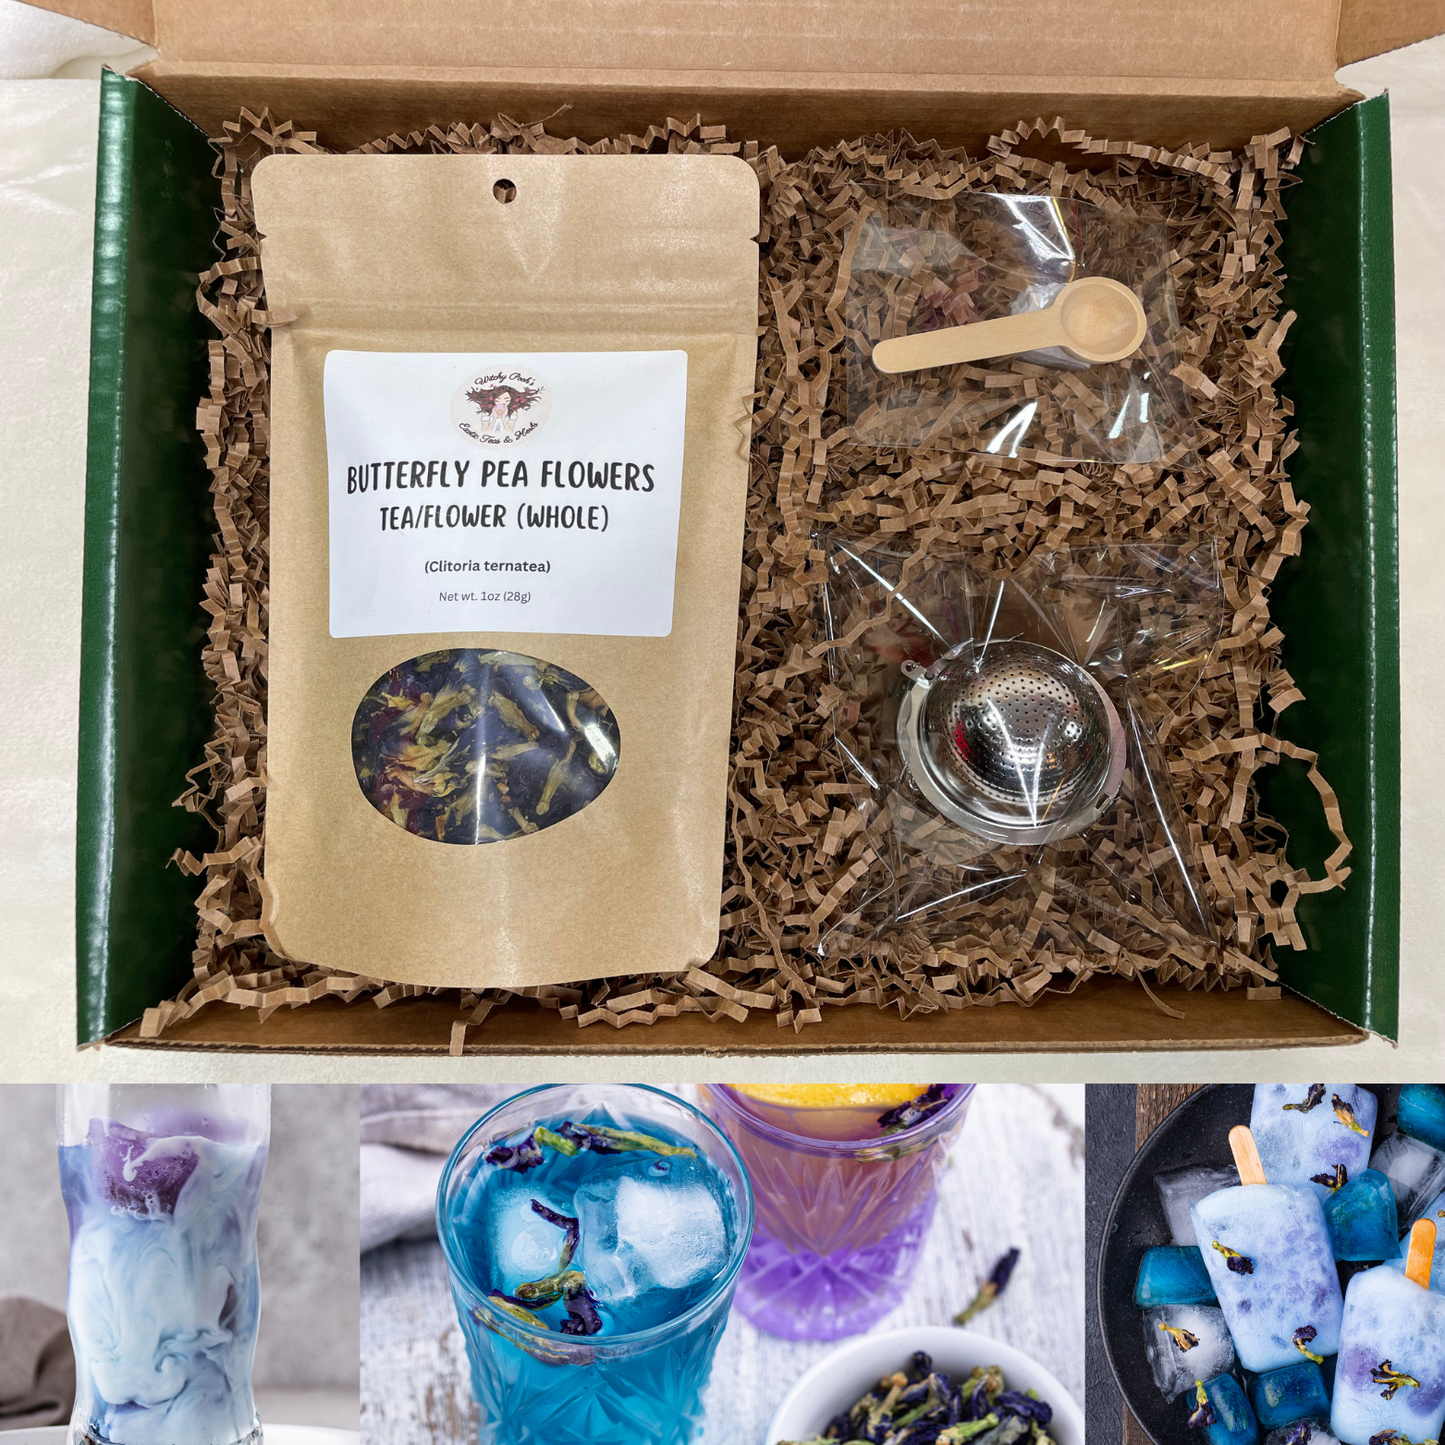 Witchy Pooh's Gift Box Set Green with a 1oz Pouch of Loose Leaf Tea, Stainless Steel Tea Ball and Wooden Spoon